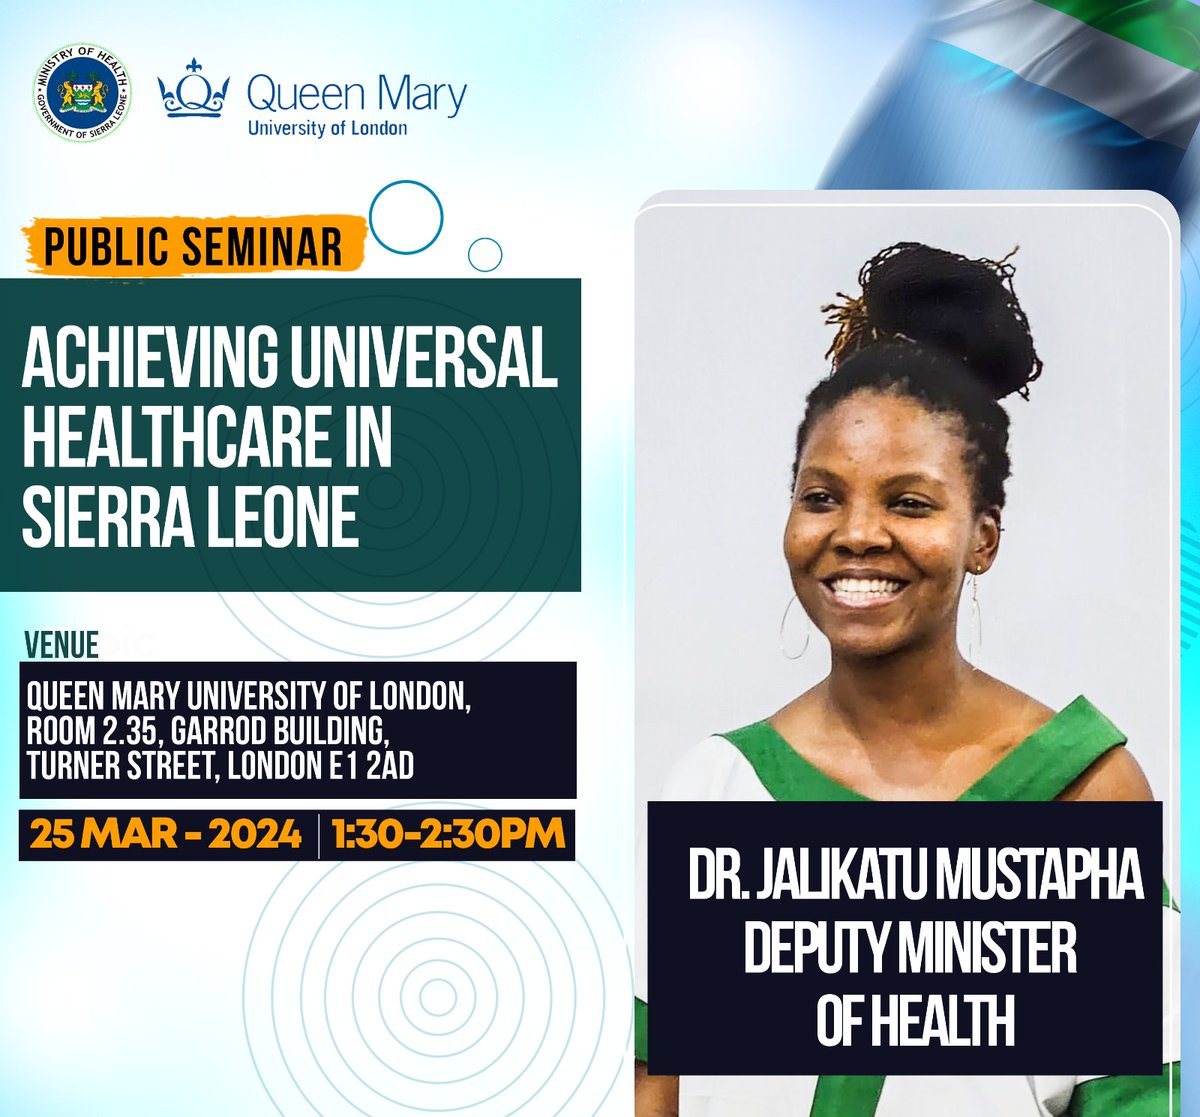 Join the Deputy Minister 2 @DrJalika today for a public seminar on #SierraLeone's partnership strategy to accelerate its journey towards achieving universal health coverage (UHC). This event will be at London's Queen Mary University from 1:30 to 2:30Pm. Don't wait to be told!!